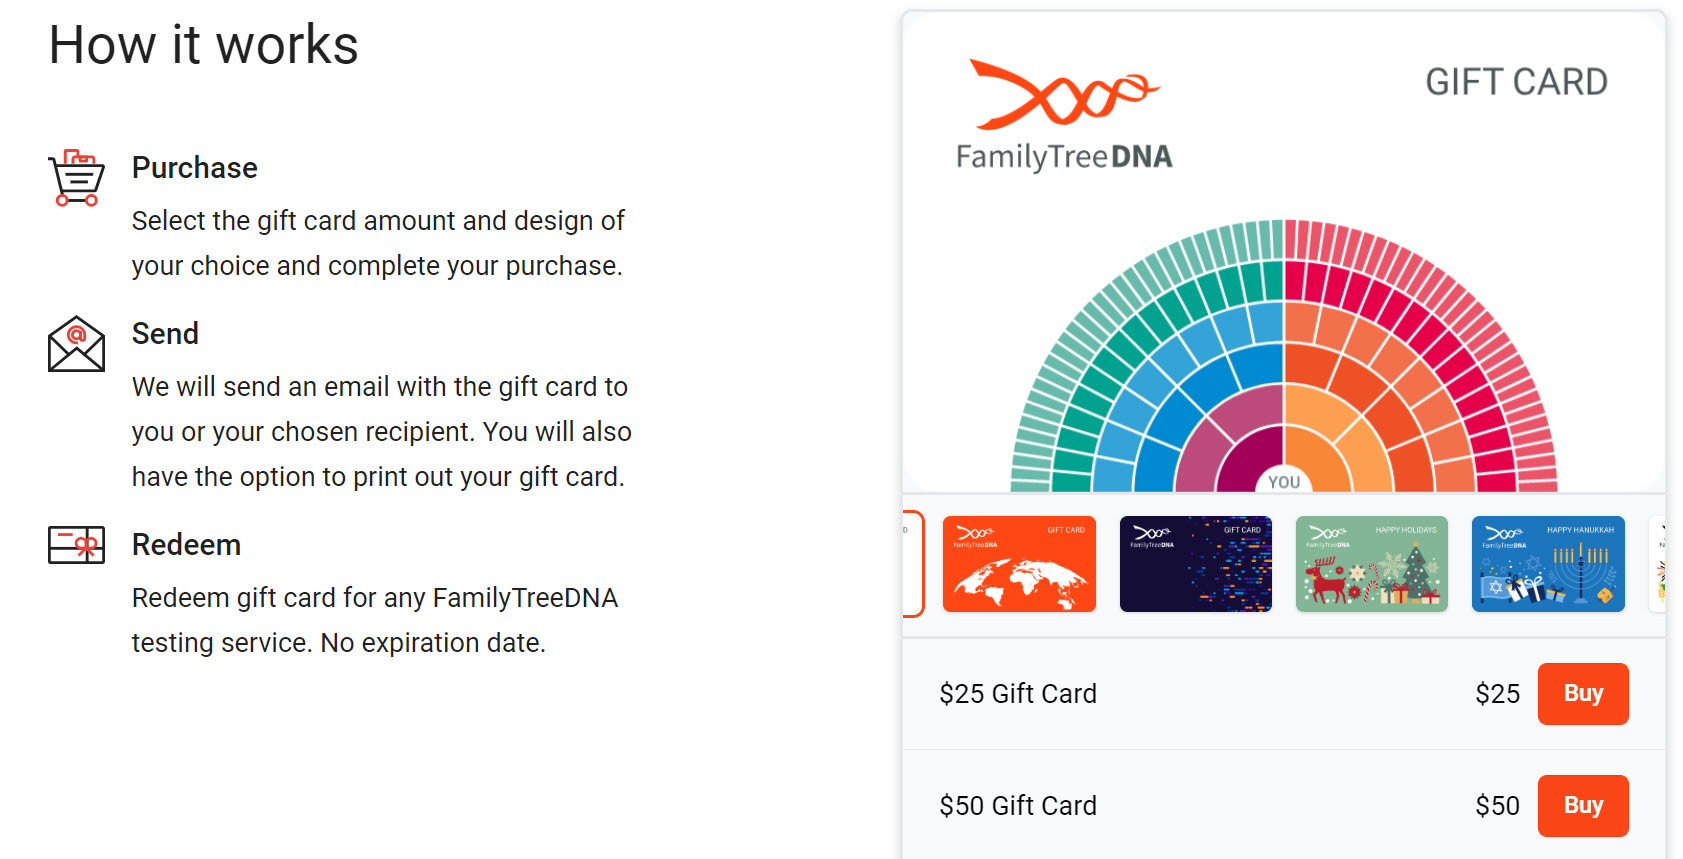 NEW! FamilyTreeDNA Gift Cards! A gift that will last a lifetime! FamilyTreeDNA’s ancestry testing services are the perfect gift for yourself, a friend, a loved one, or all of the above! https://genealogybargains.com/ftdna-giftcards #ad #genealogy #DNA #holidaygifts #holidayshopping